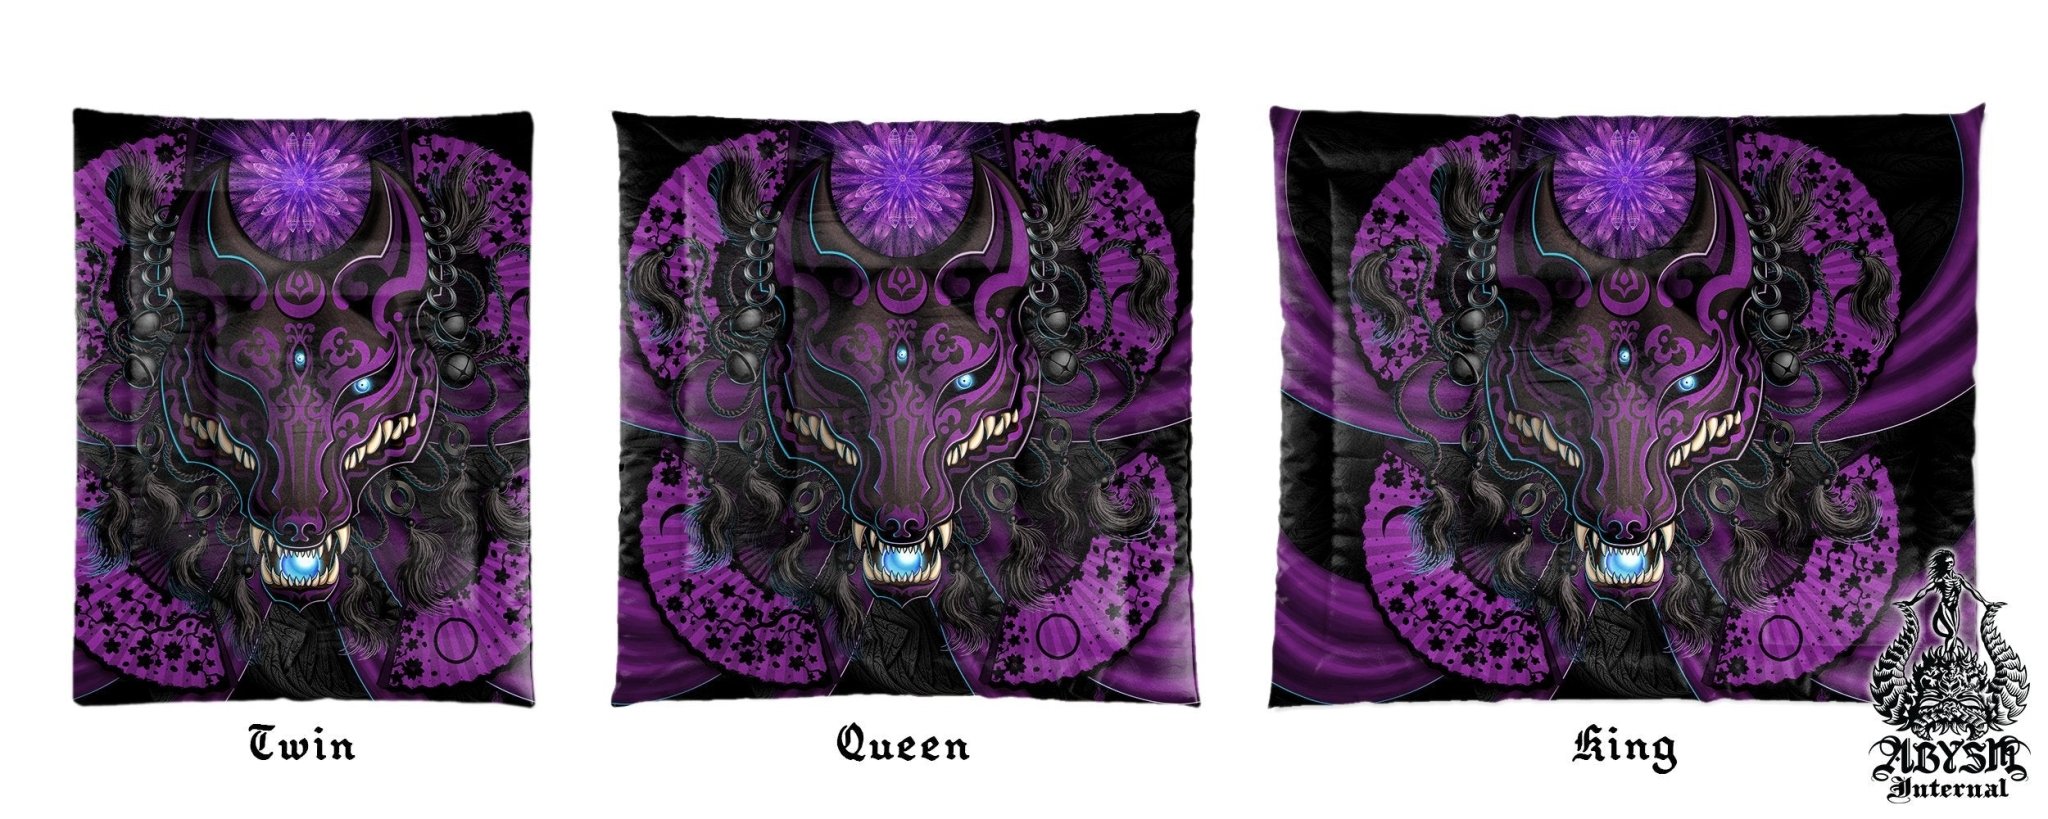 Pastel Goth Kitsune Mask Bedding Set, Comforter and Duvet, Okami, Anime Bed Cover and Bedroom Decor, Japanese Fox, King, Queen and Twin Size - Black, Purple - Abysm Internal